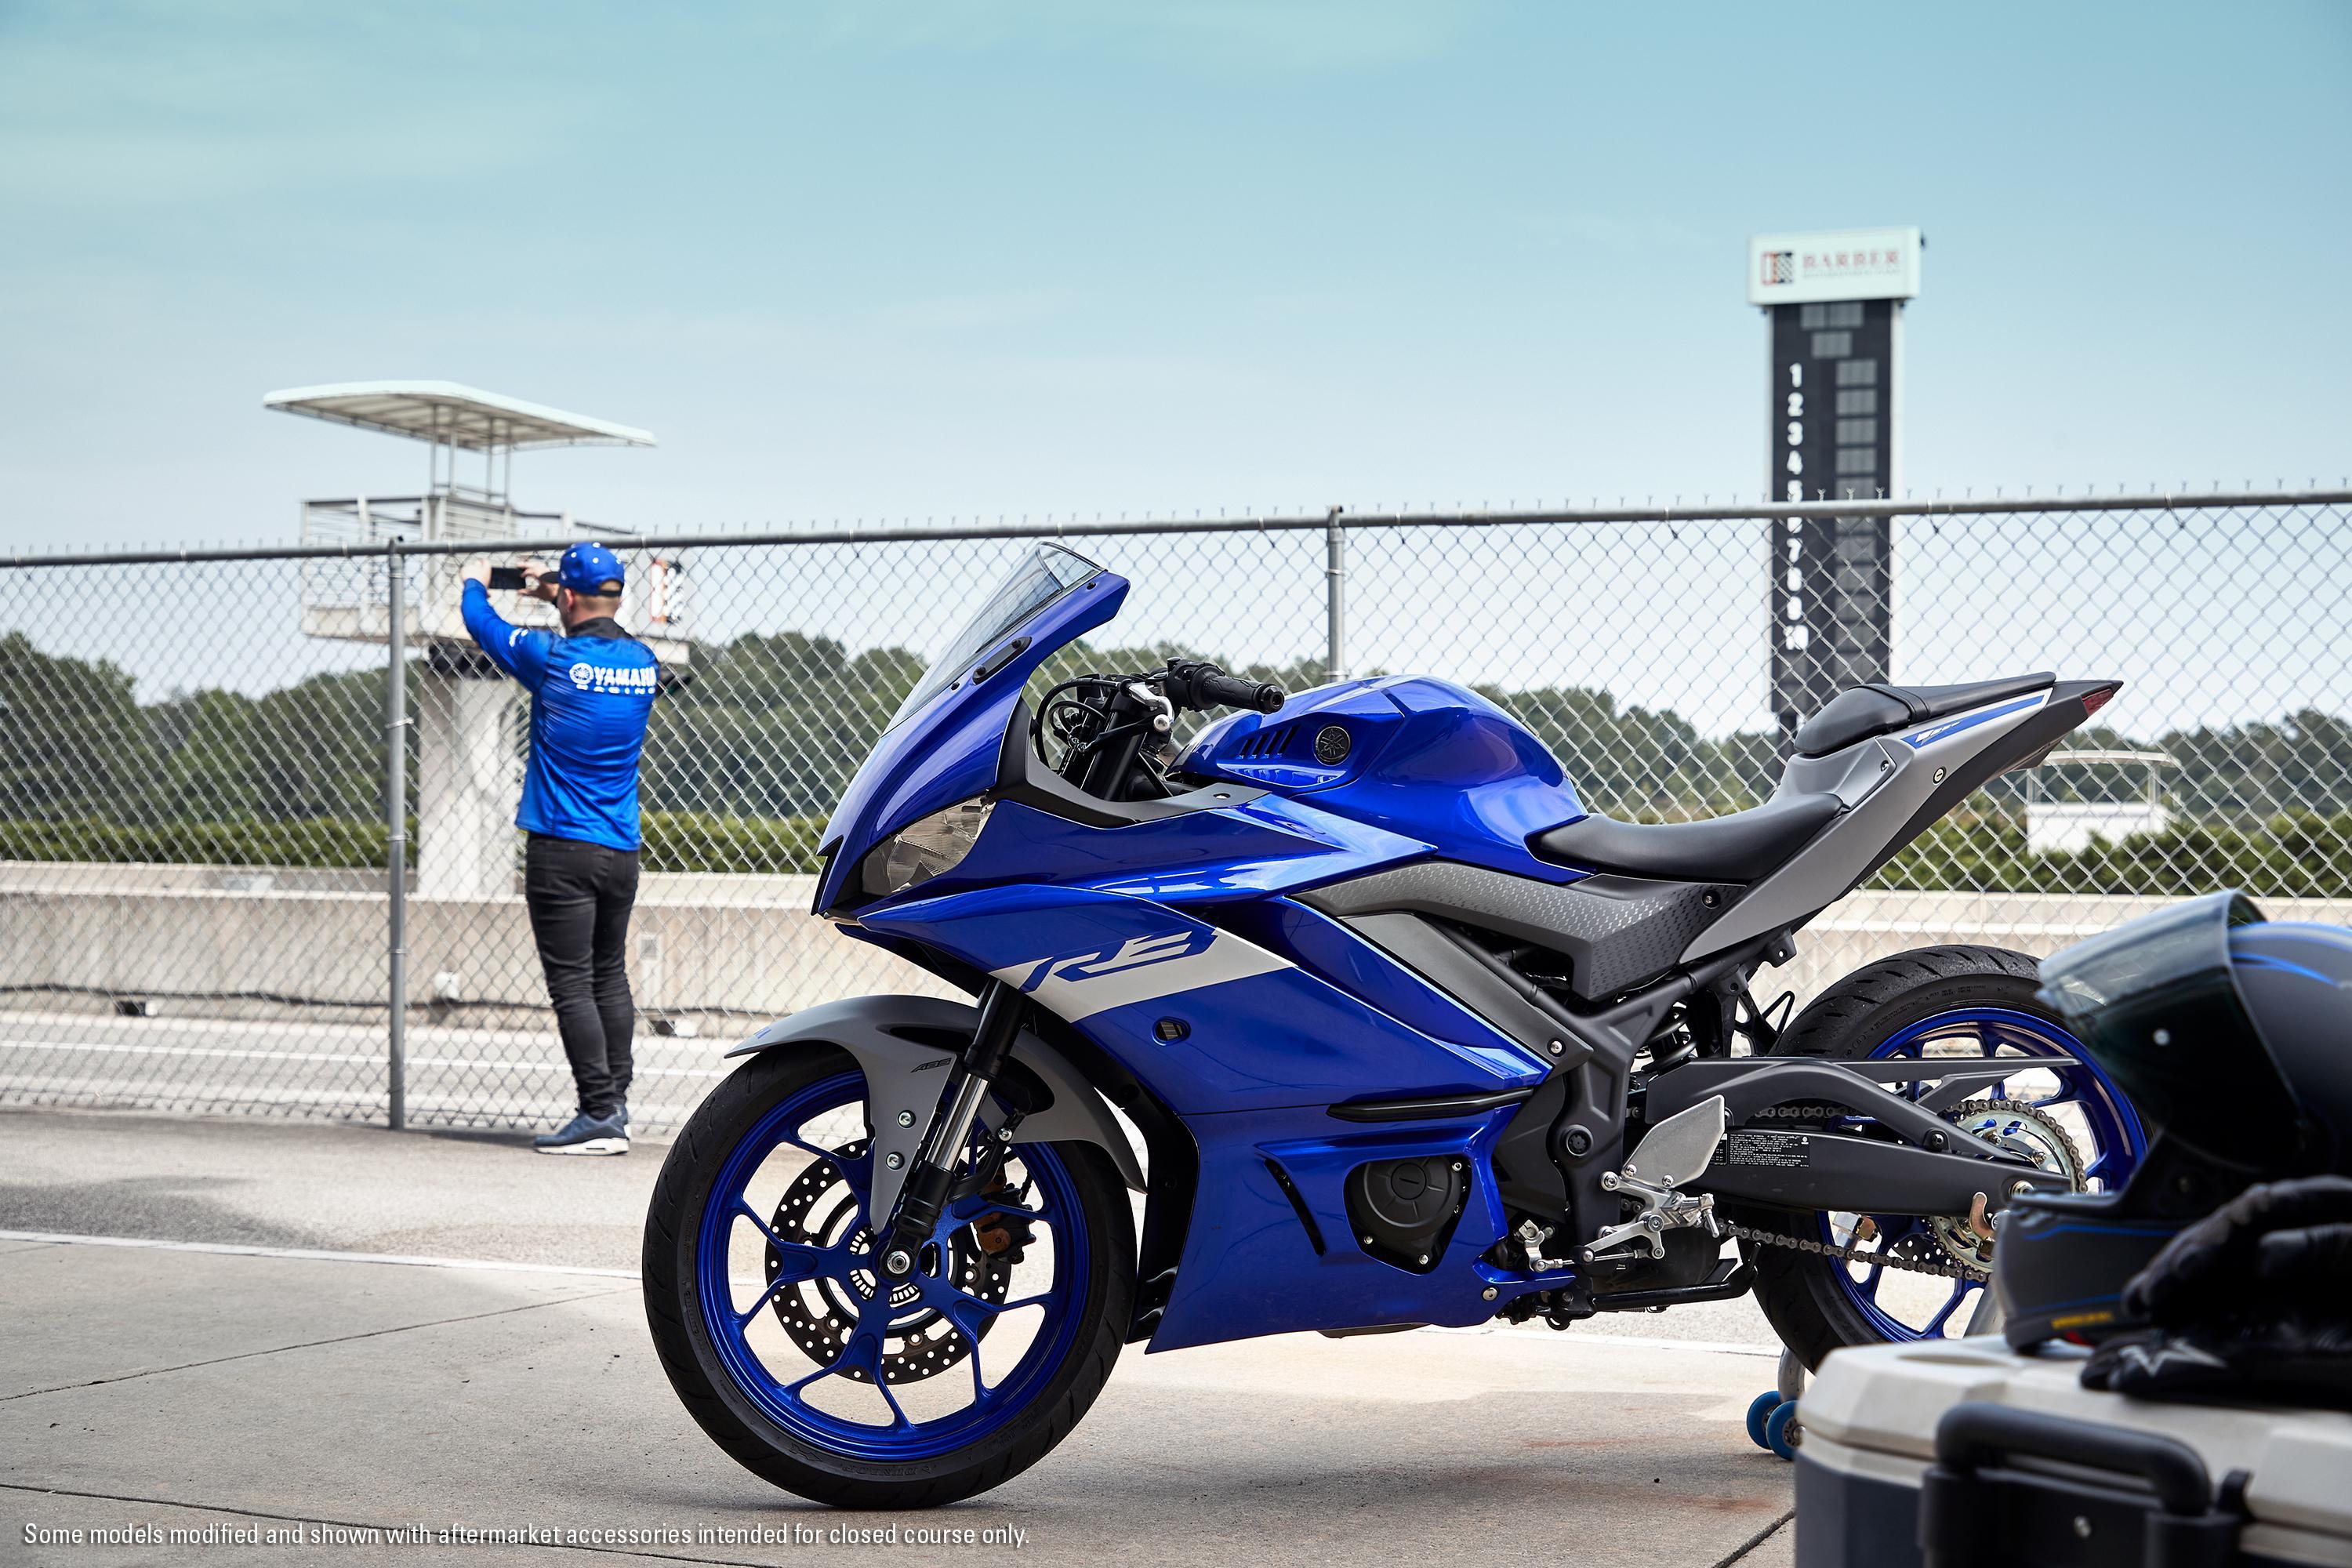 2020 Yamaha YZF R3 Picture, Photo, Wallpaper